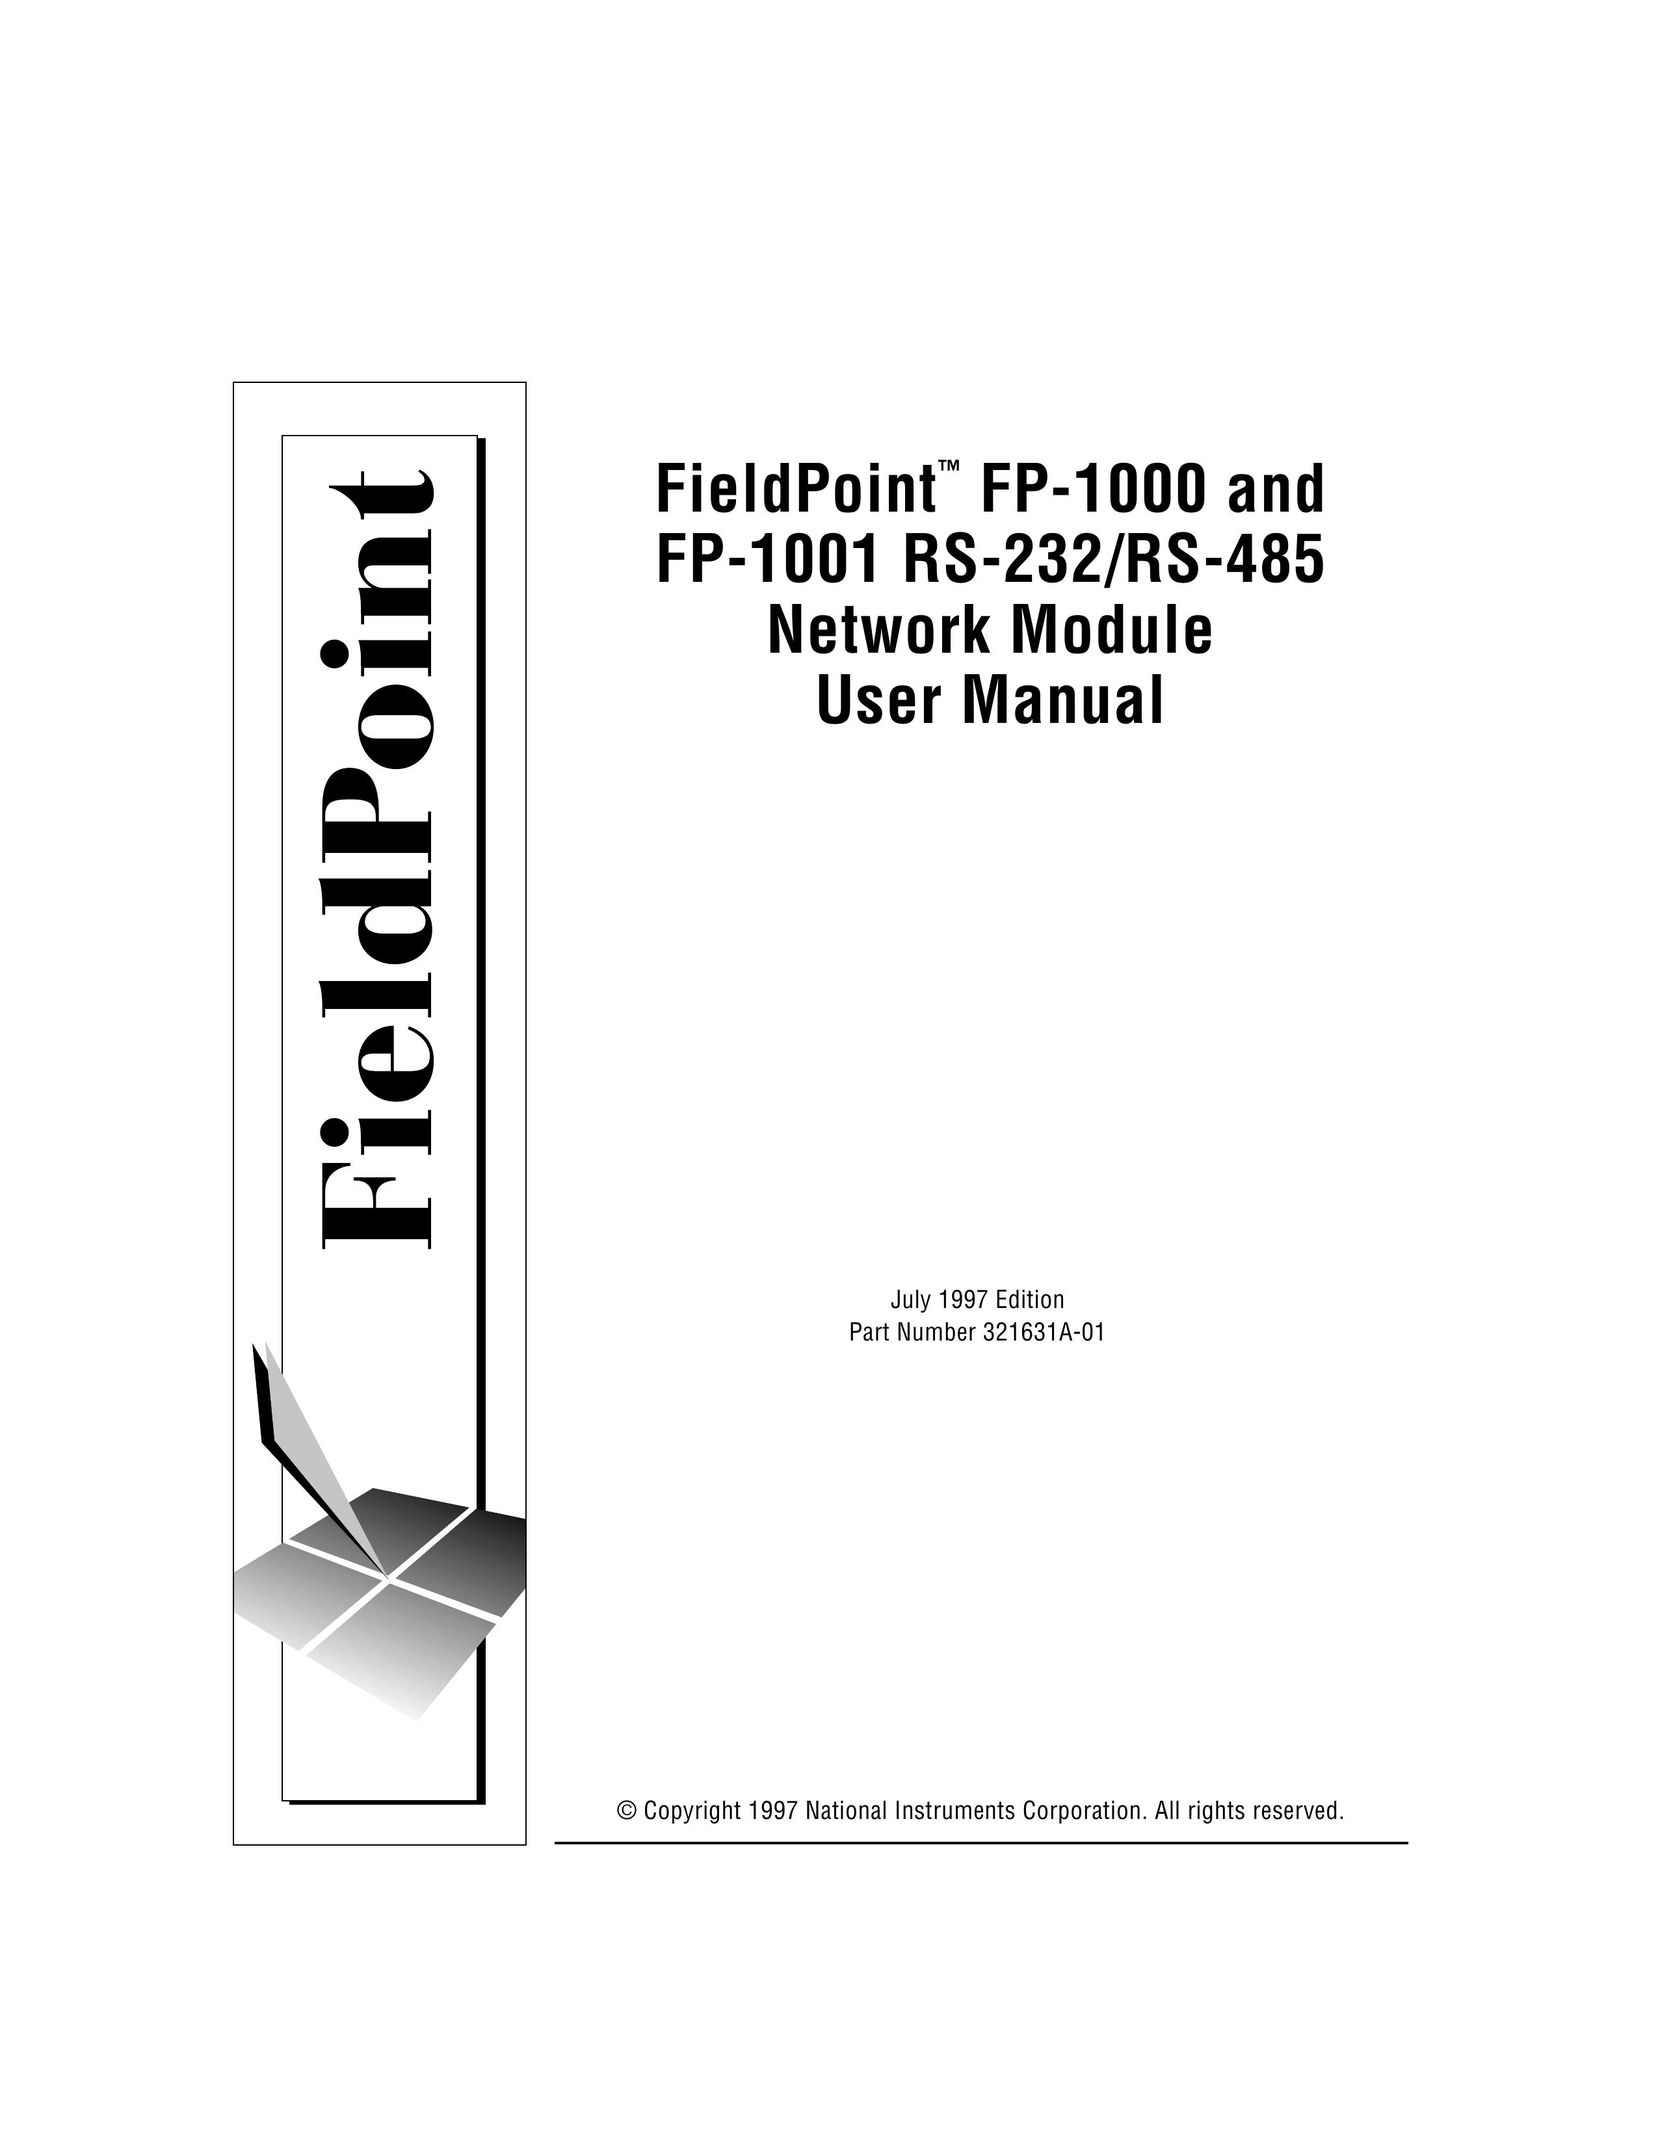 National Instruments FP-1000 Network Card User Manual